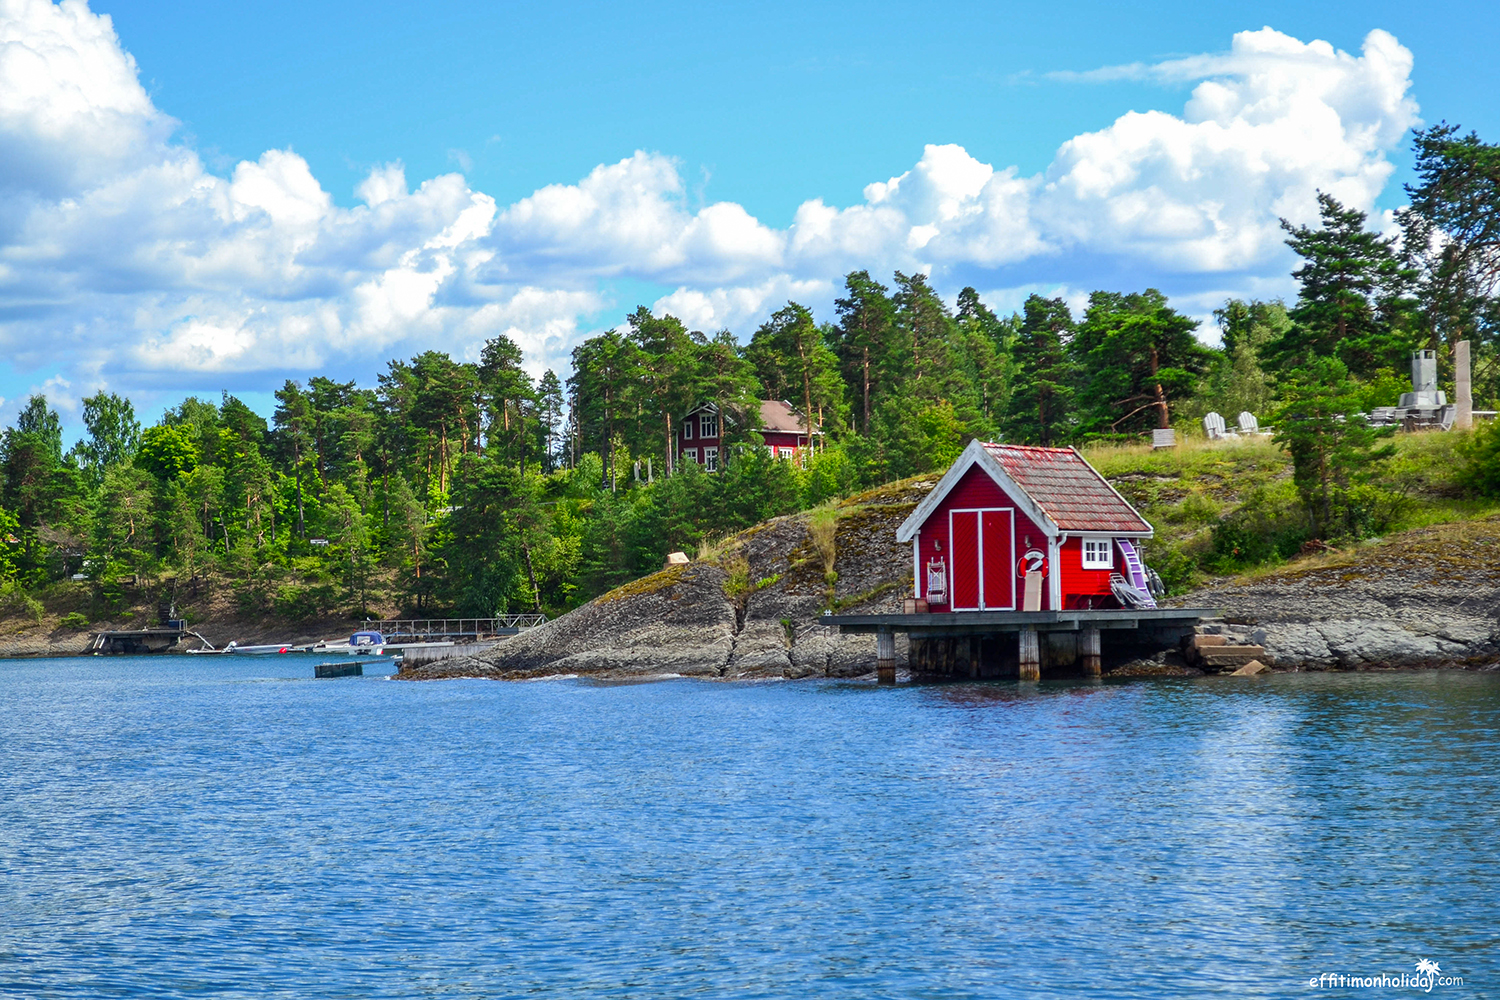 With the fjord, the forests and the stunning architecture, the capital of Norway shouldn't be missed